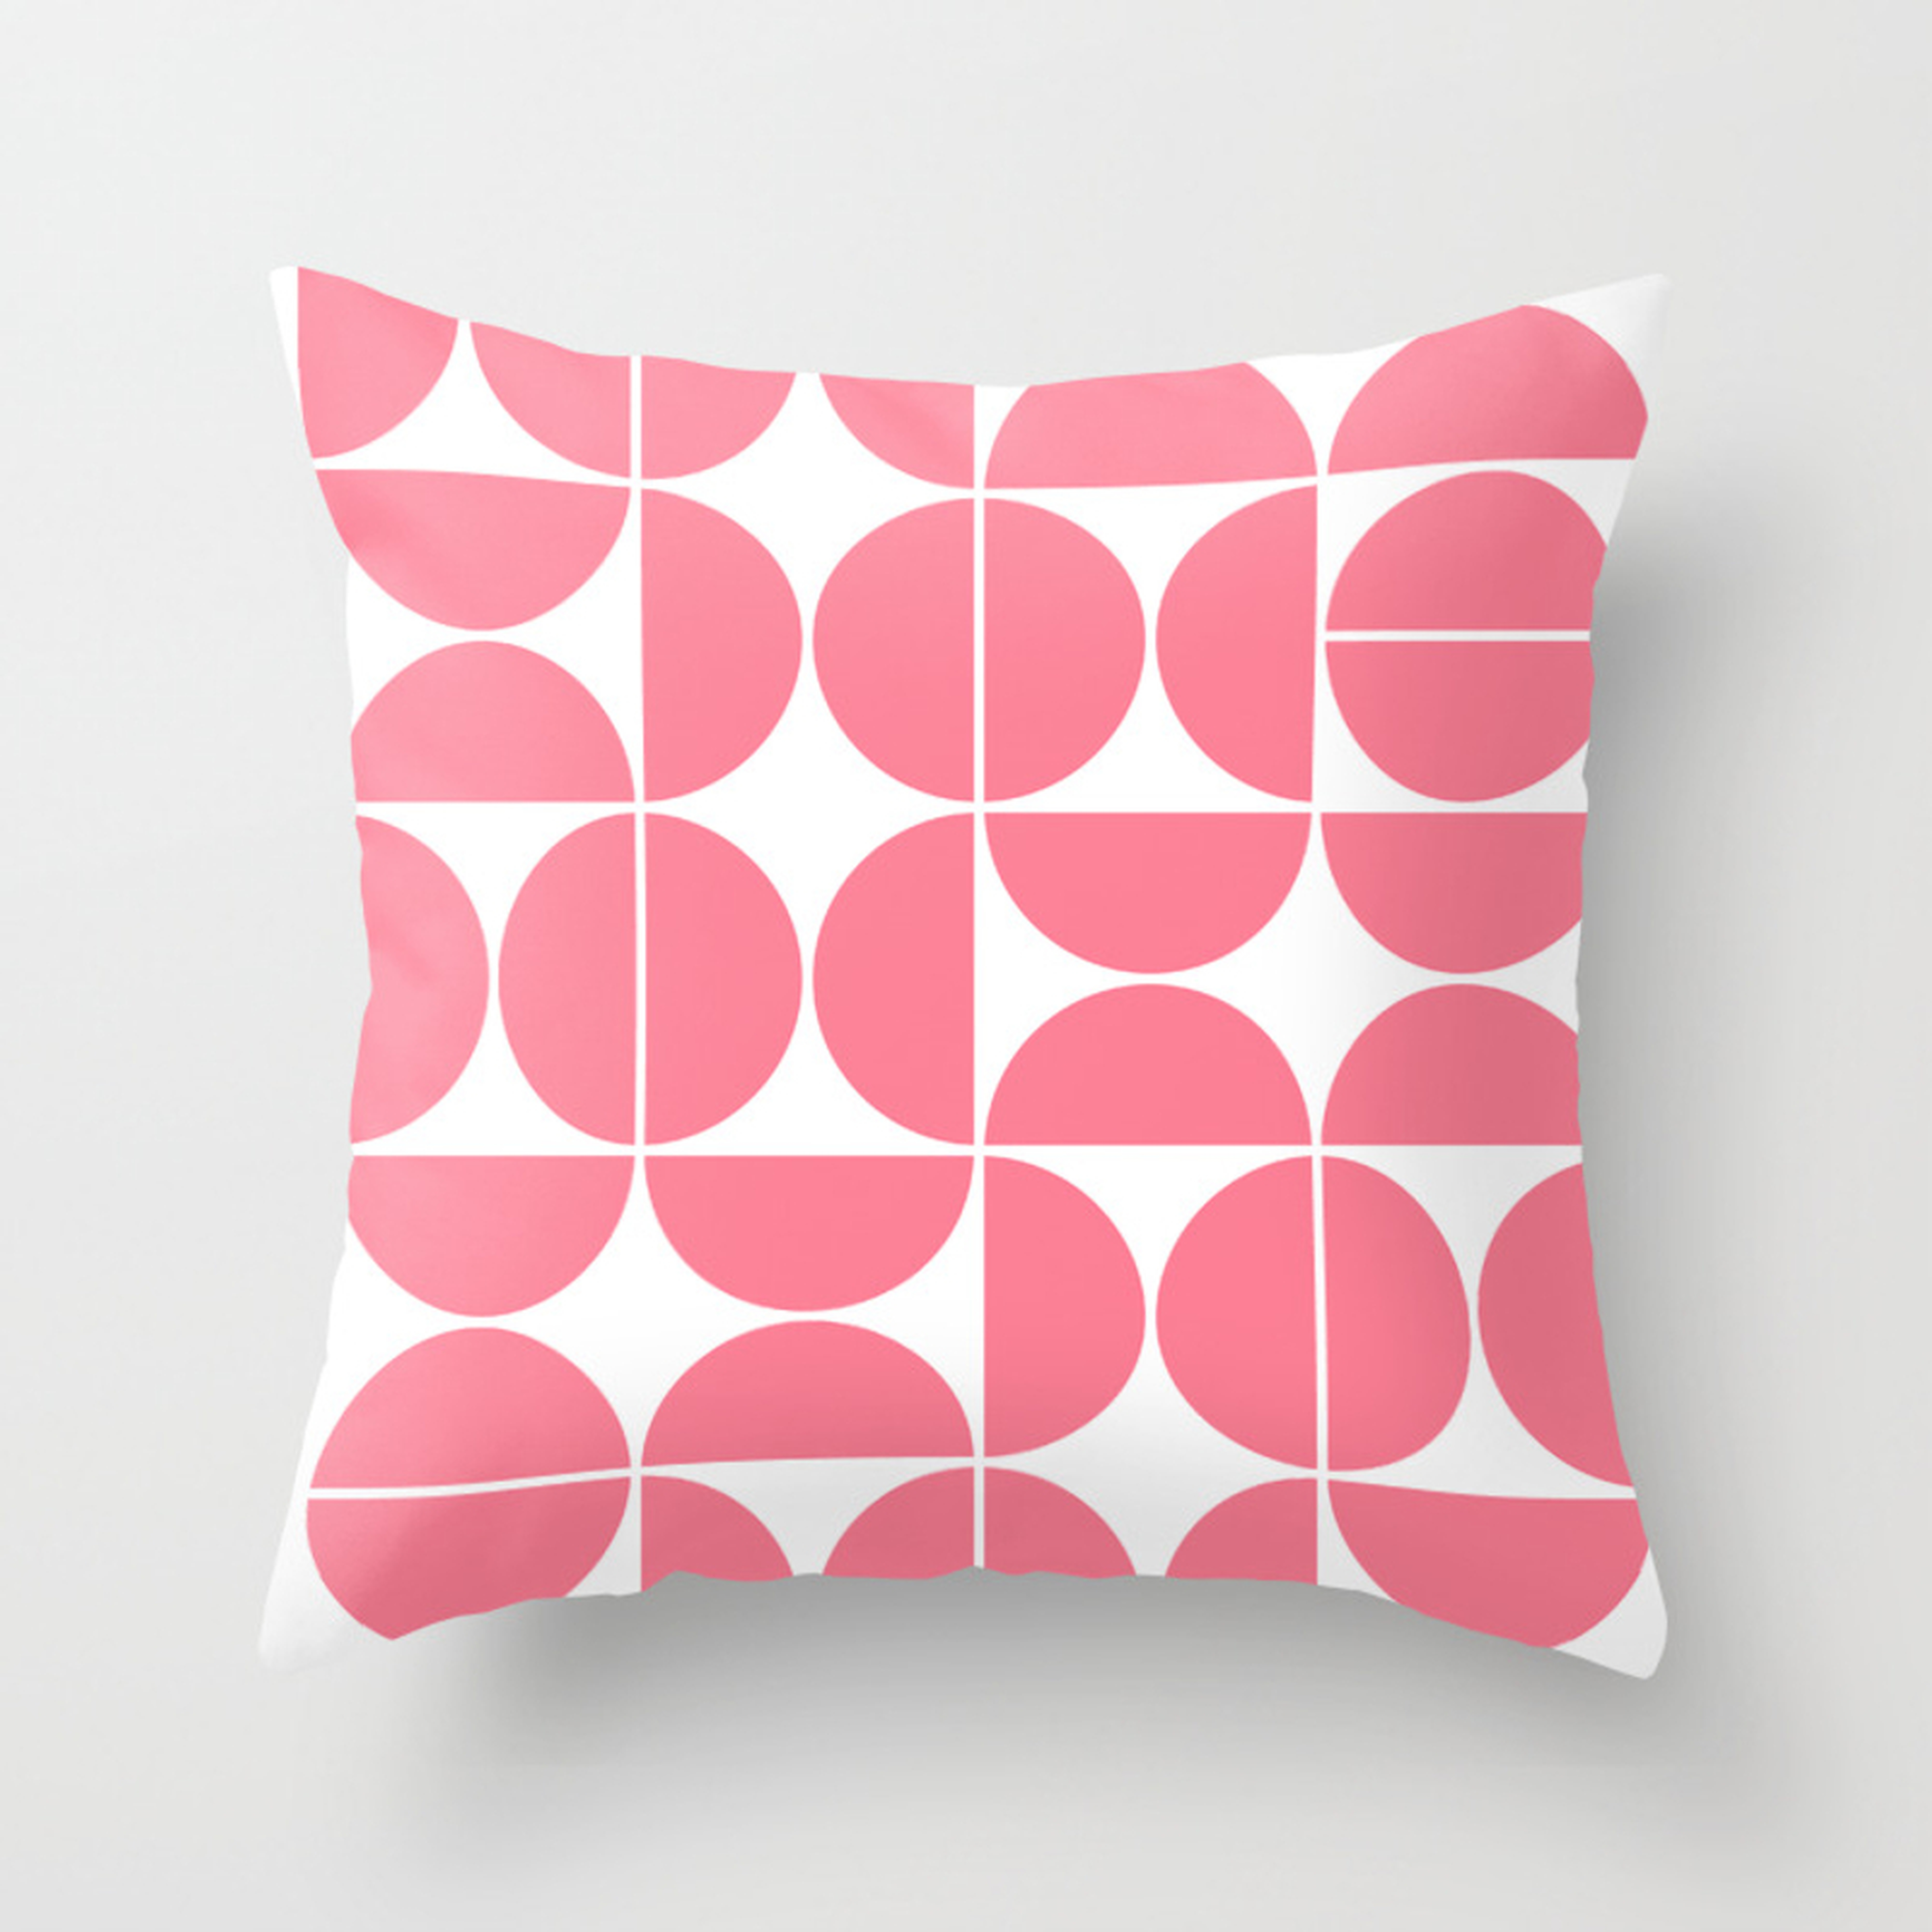 Mid Century Modern Geometric 04 Pink Throw Pillow by The Old Art Studio - Cover (20" x 20") With Pillow Insert - Outdoor Pillow - Society6